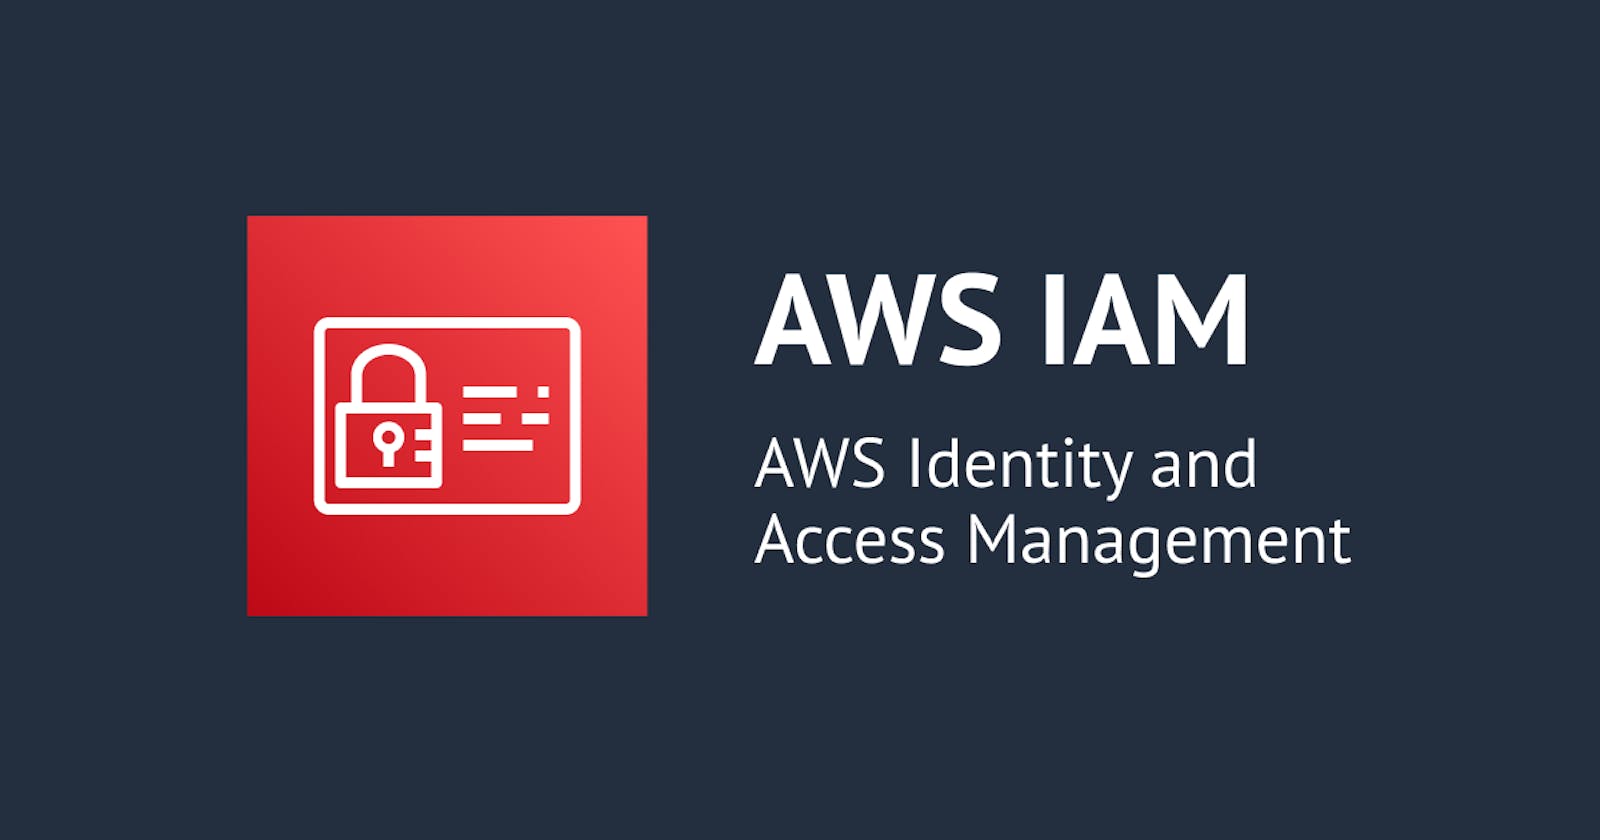 What is Identity Federation, IAM Identities (Roles, Groups and Users) in AWS IAM?